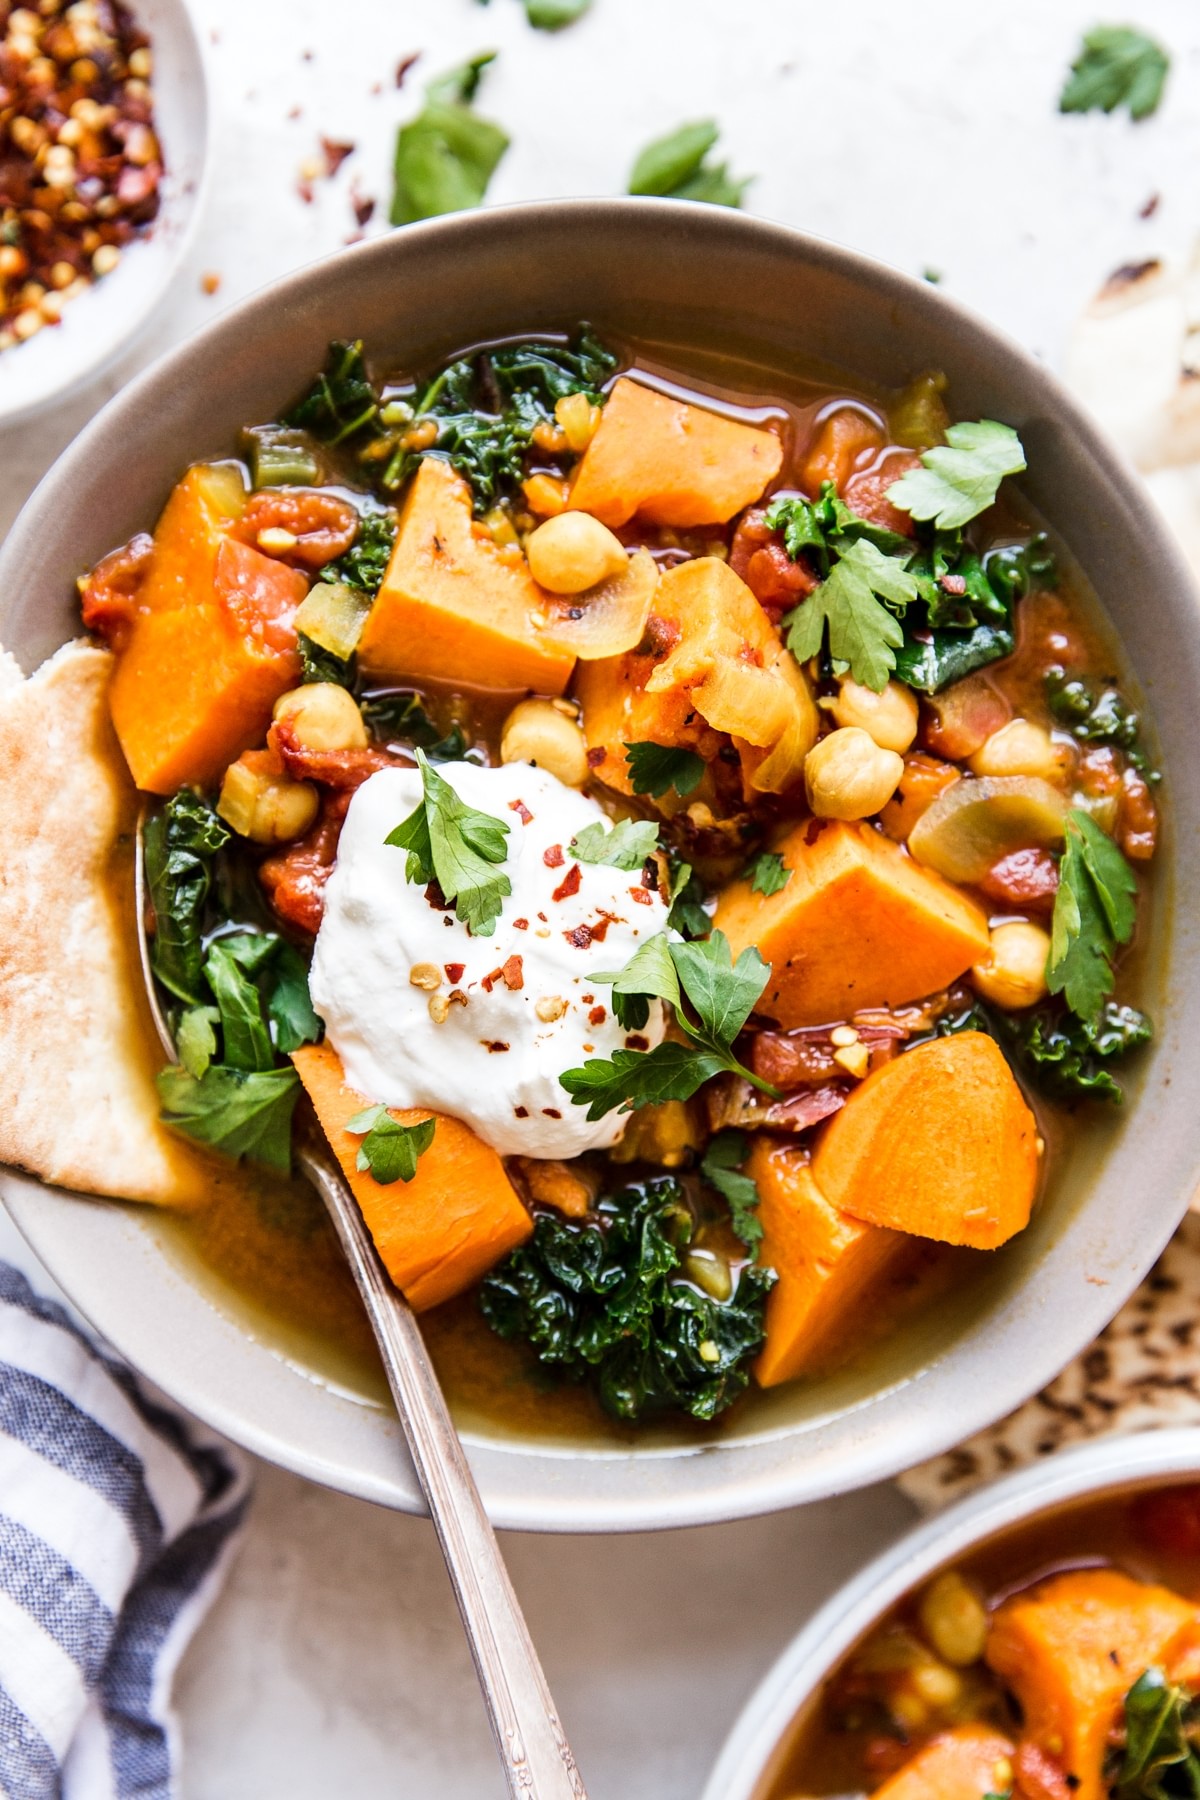 Warm Spiced Vegetarian Vegetable Stew with sweet potato, kale and chickpeas